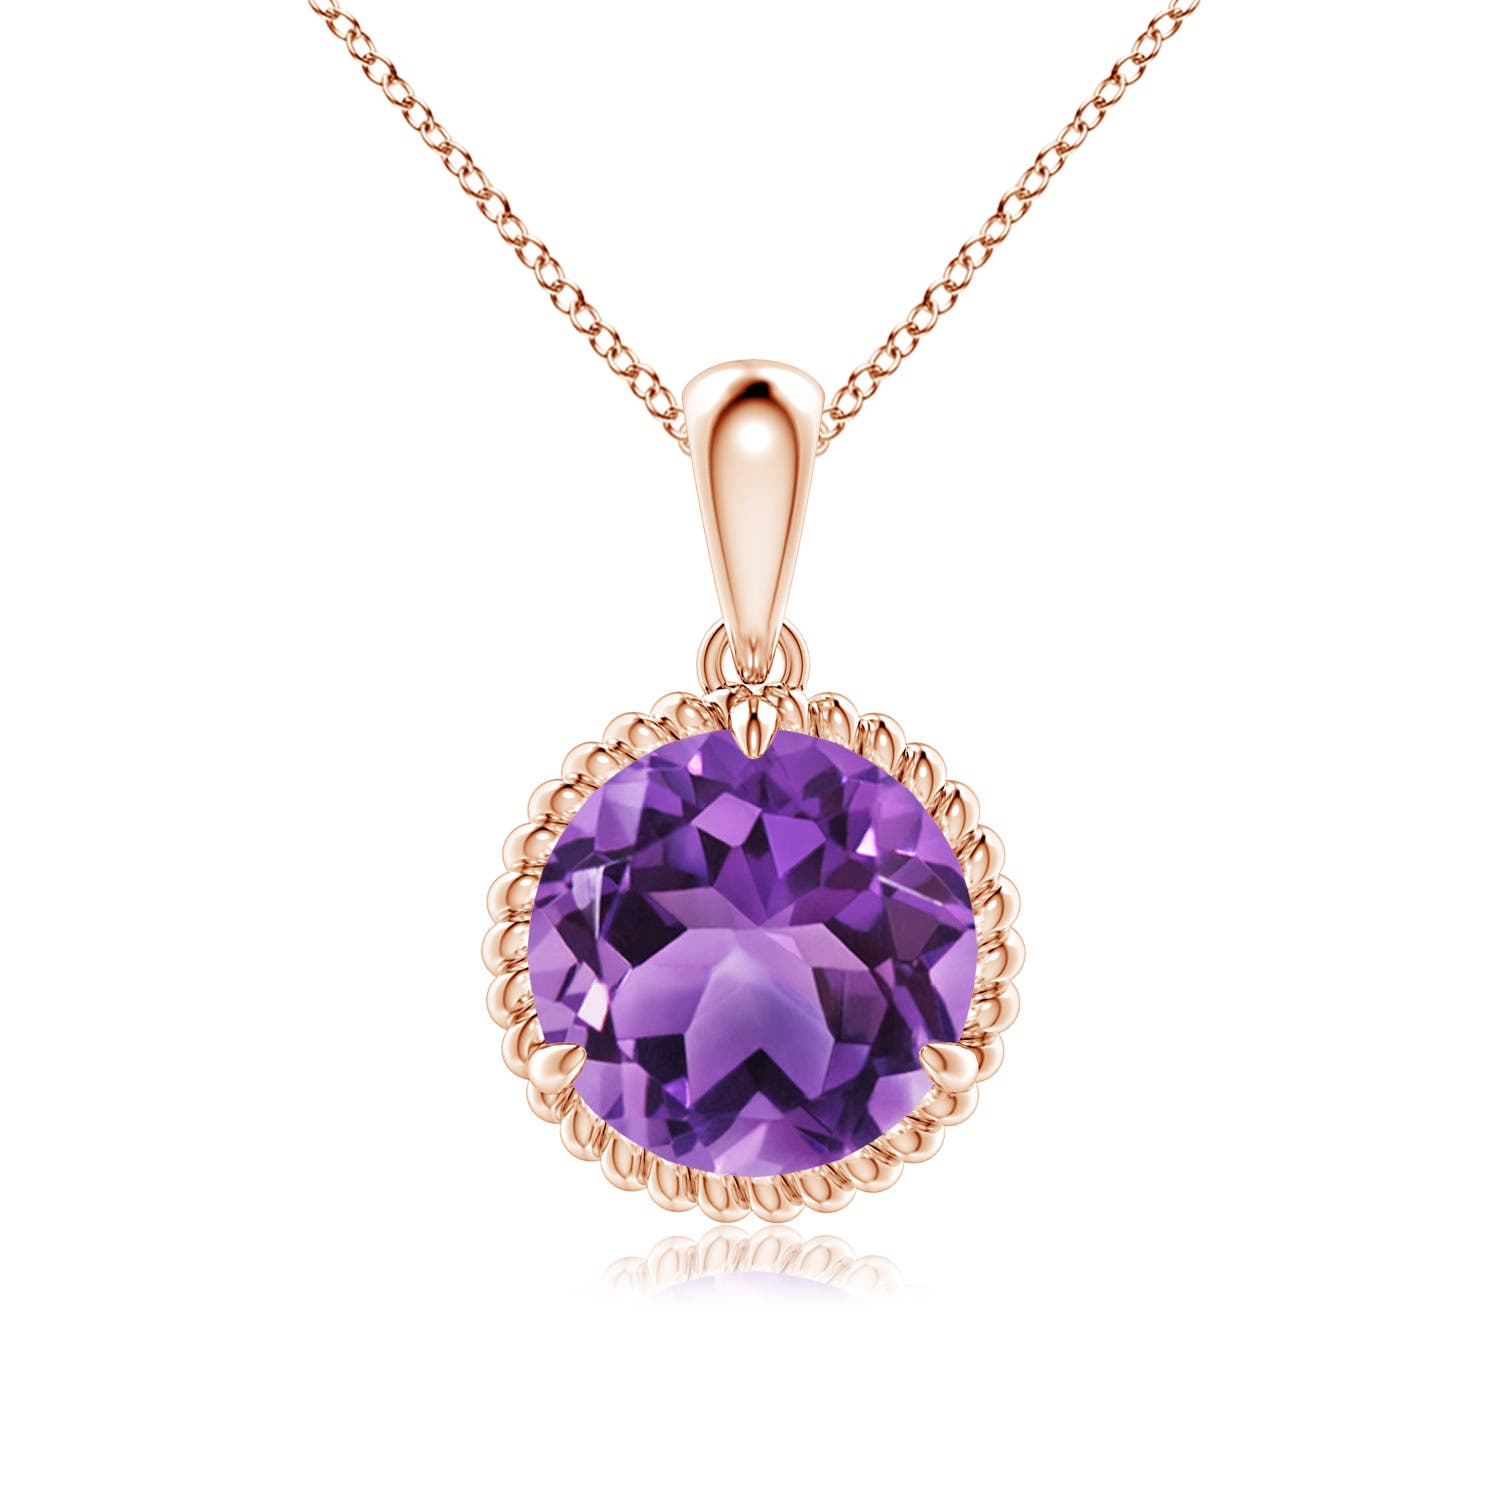 AA - Amethyst / 2.45 CT / 14 KT Rose Gold